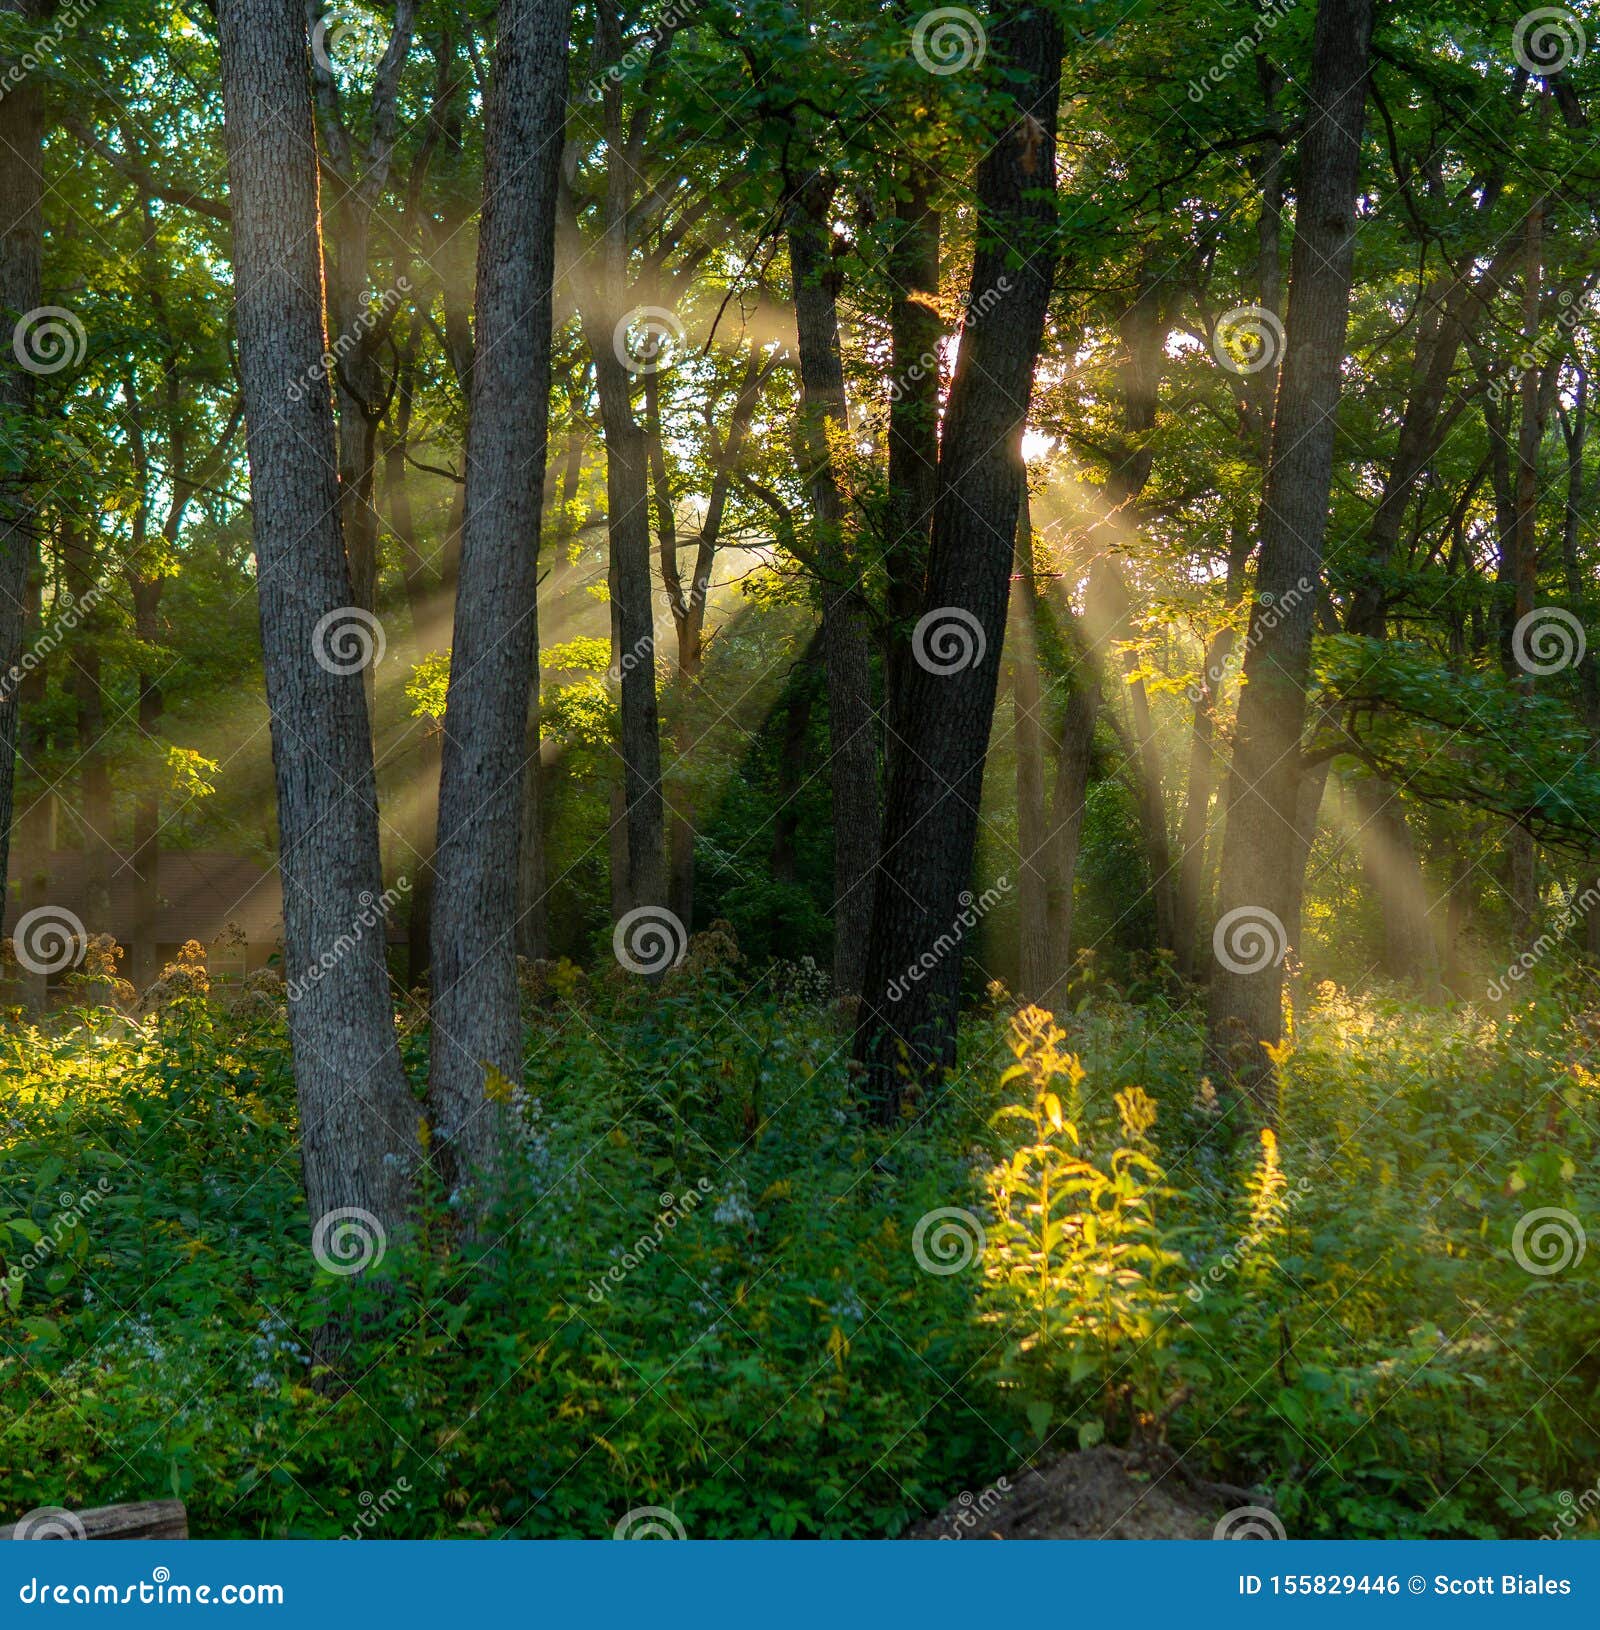 Sunlight Shining Through Trees In Forest Stock Photo Image Of Road Natural